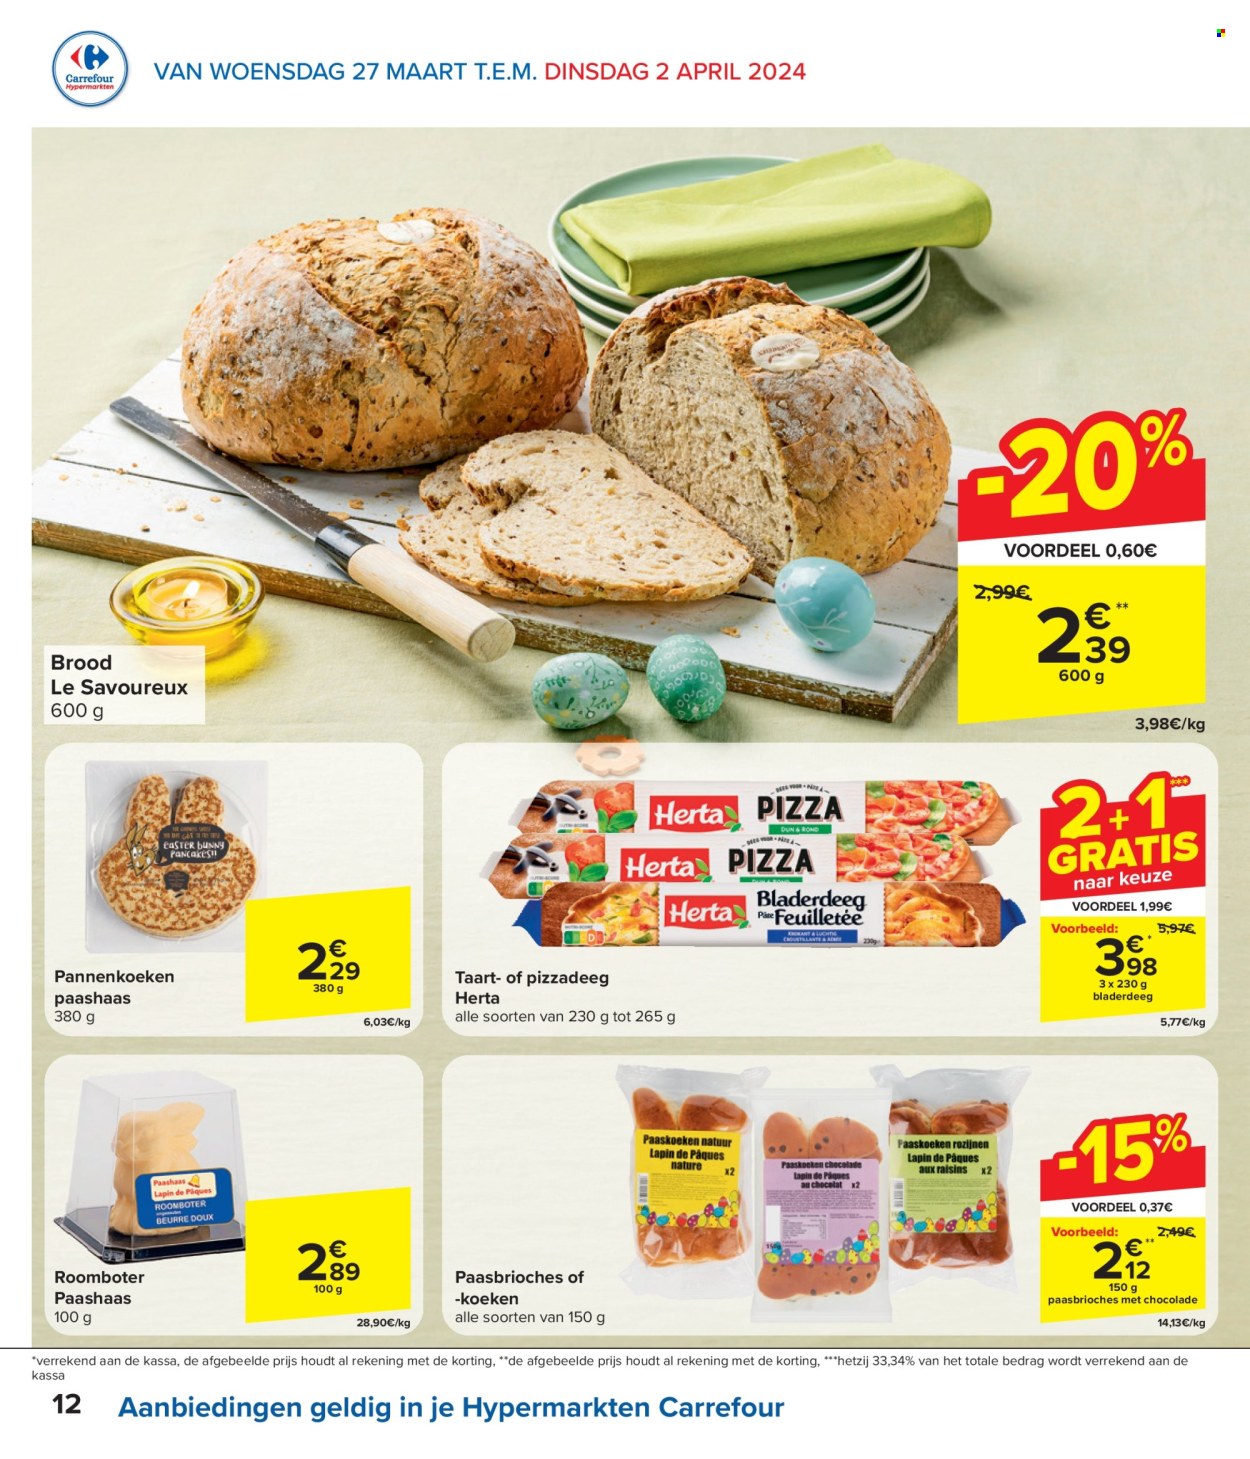 Catalogue Carrefour hypermarkt - 27.3.2024 - 8.4.2024. Page 12.